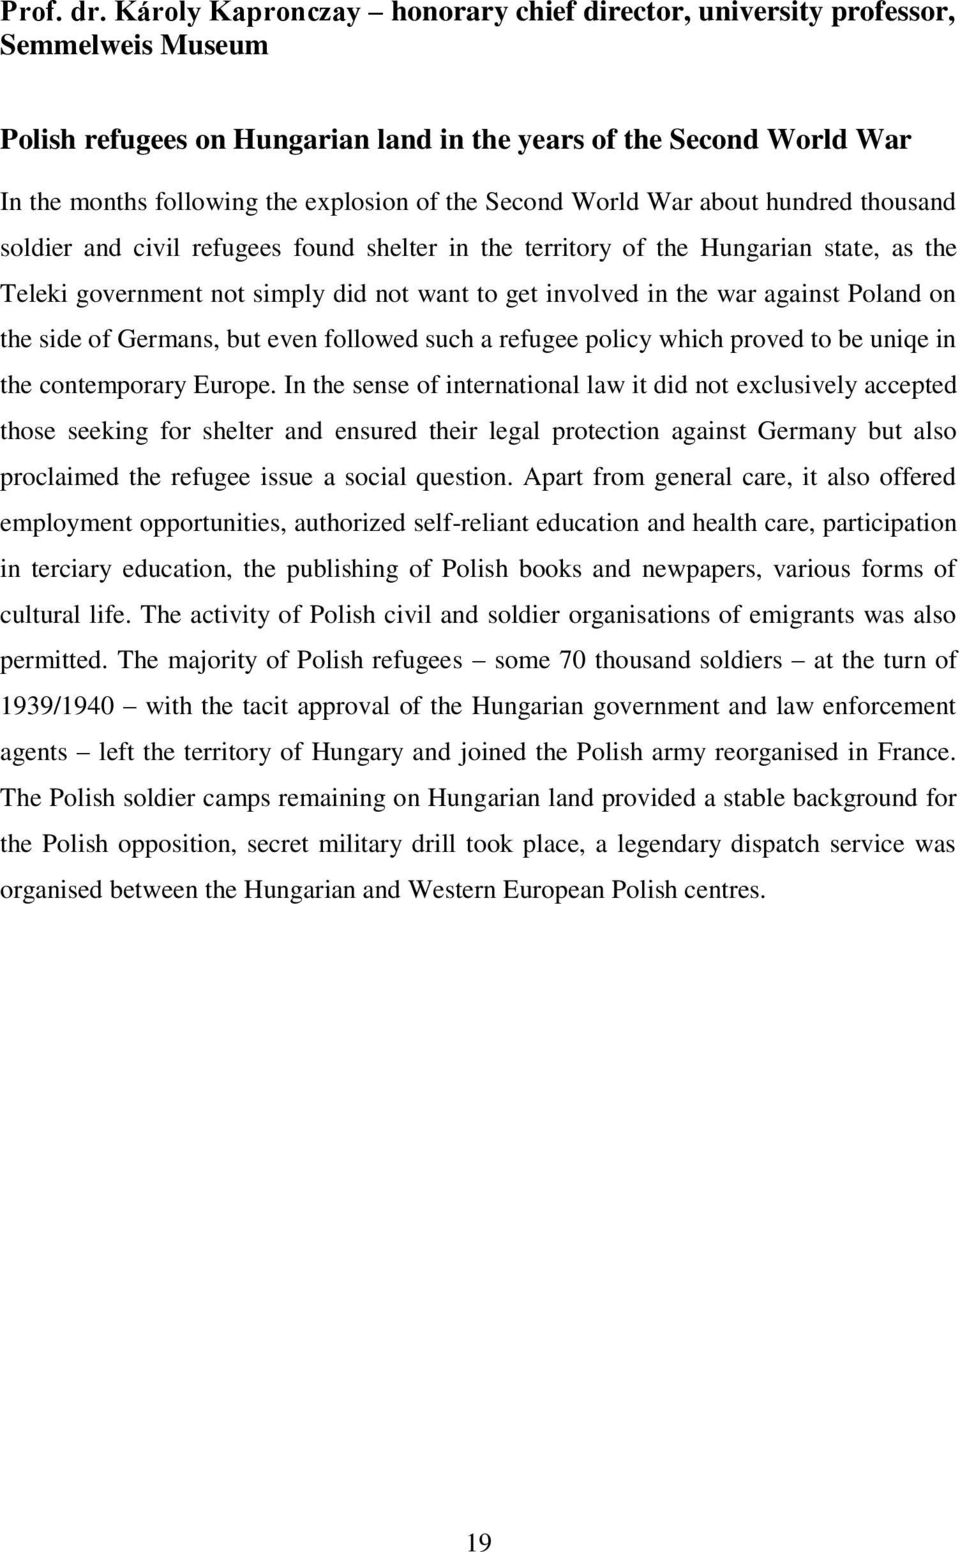 Second World War about hundred thousand soldier and civil refugees found shelter in the territory of the Hungarian state, as the Teleki government not simply did not want to get involved in the war